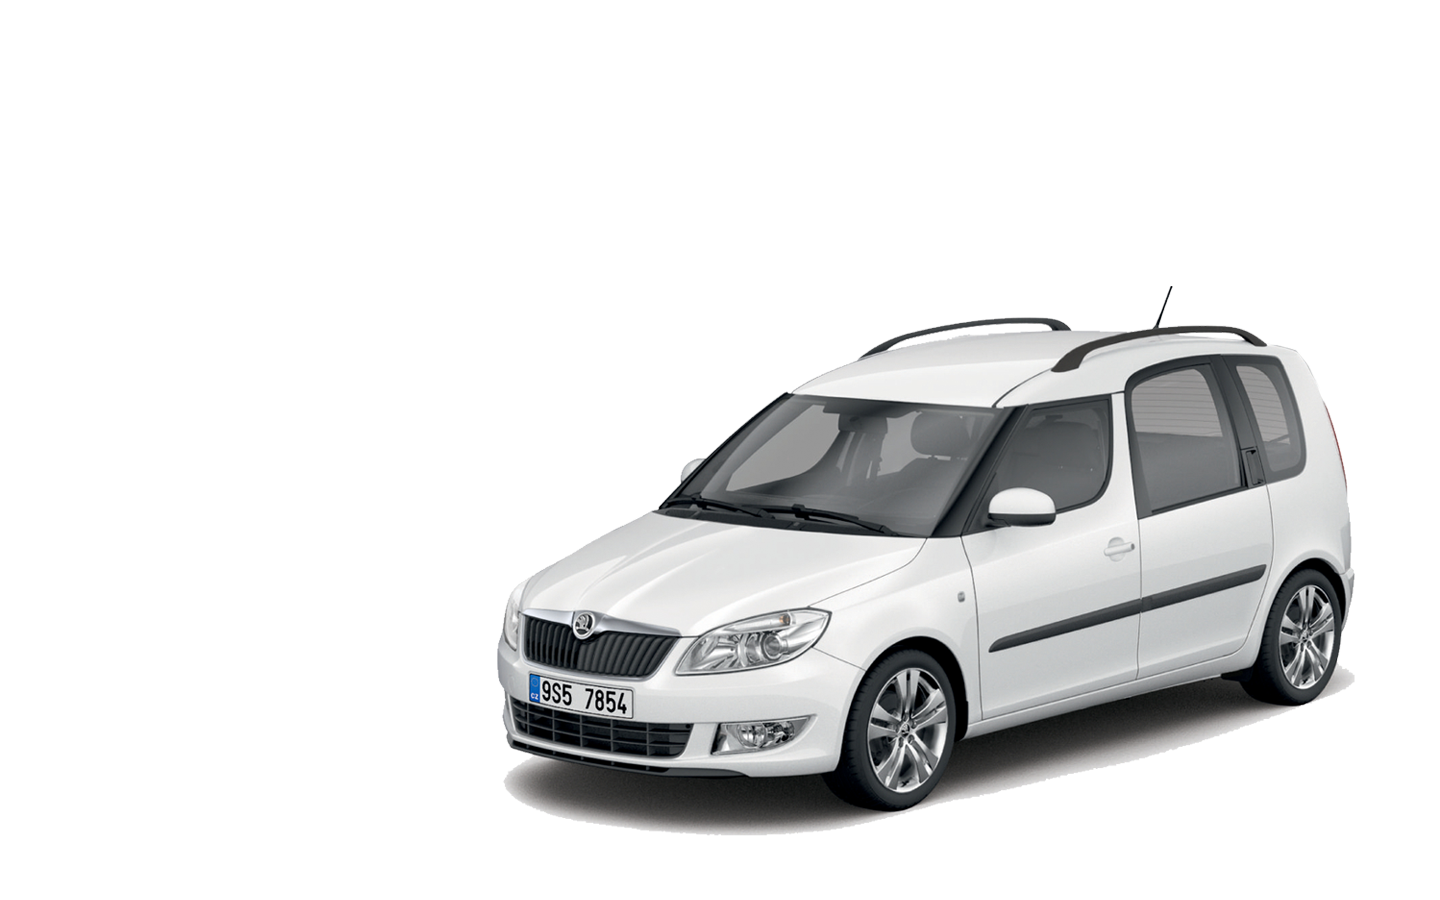 Rent a Skoda Roomster family car in Crete